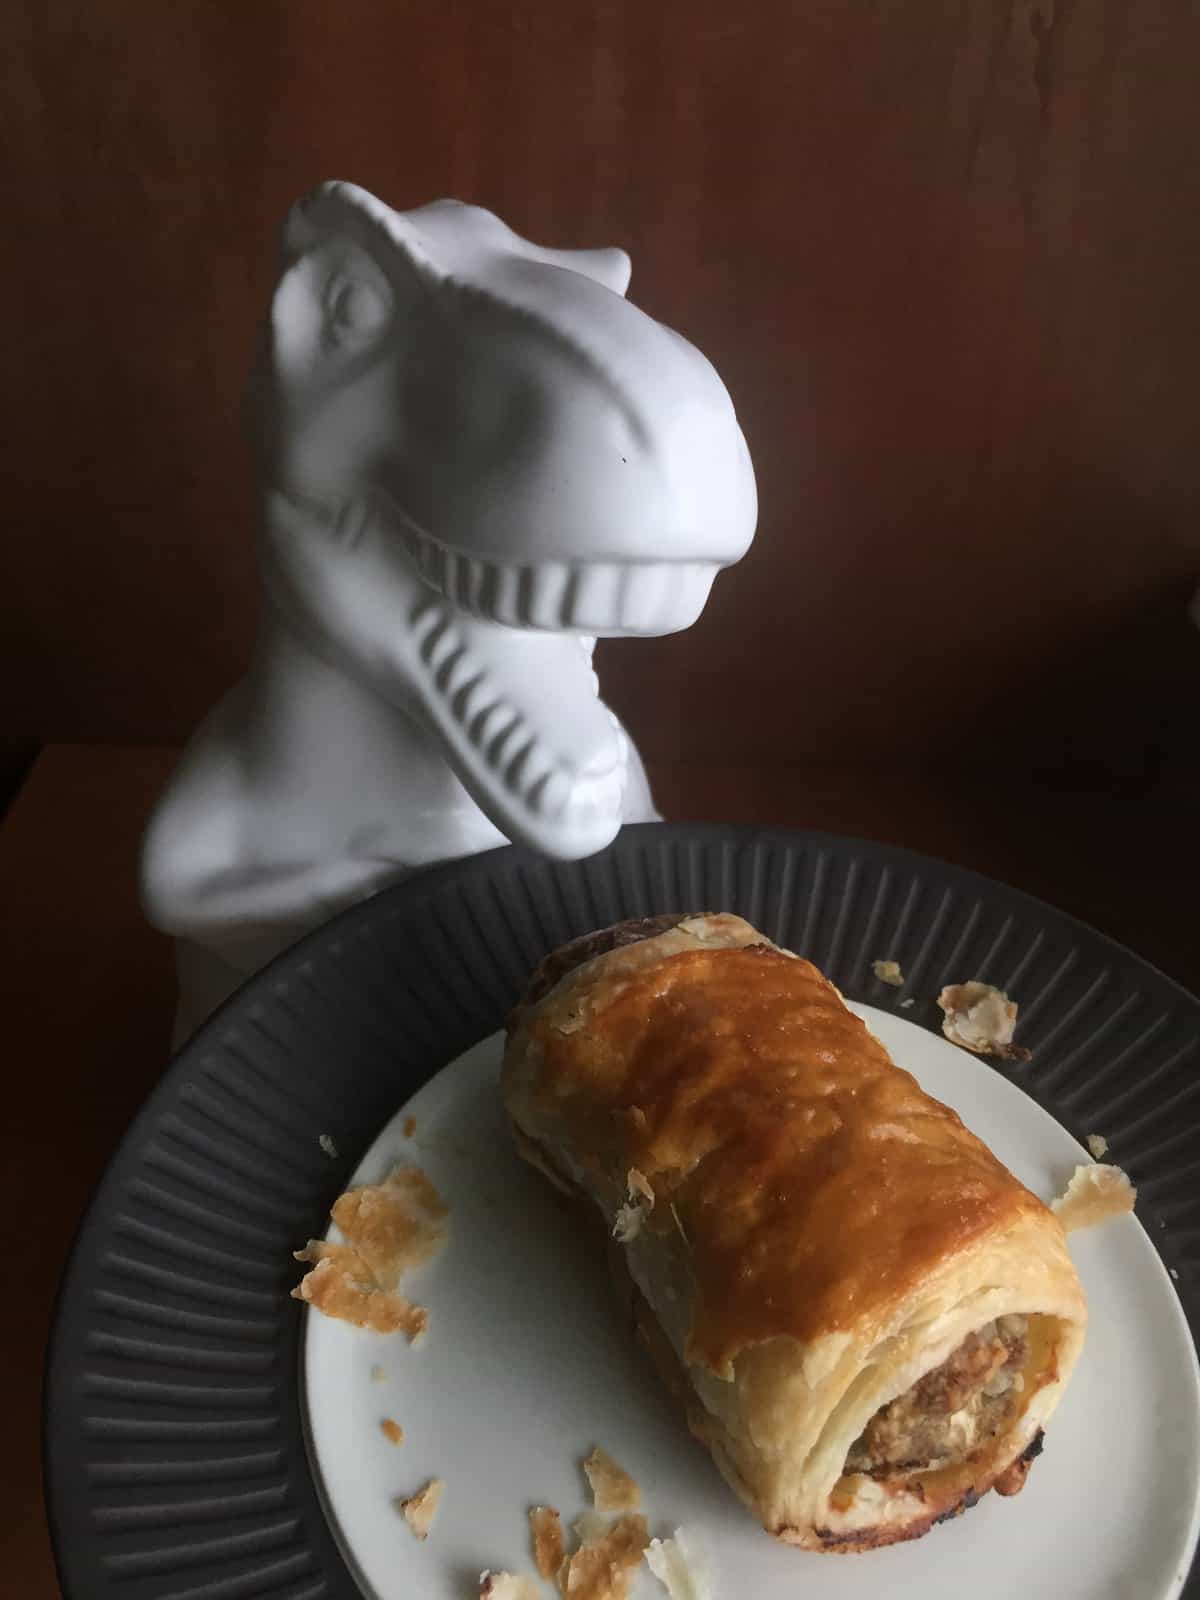 a dinosaur cookie jar about to eat a puff pastry sausage roll on a plate.